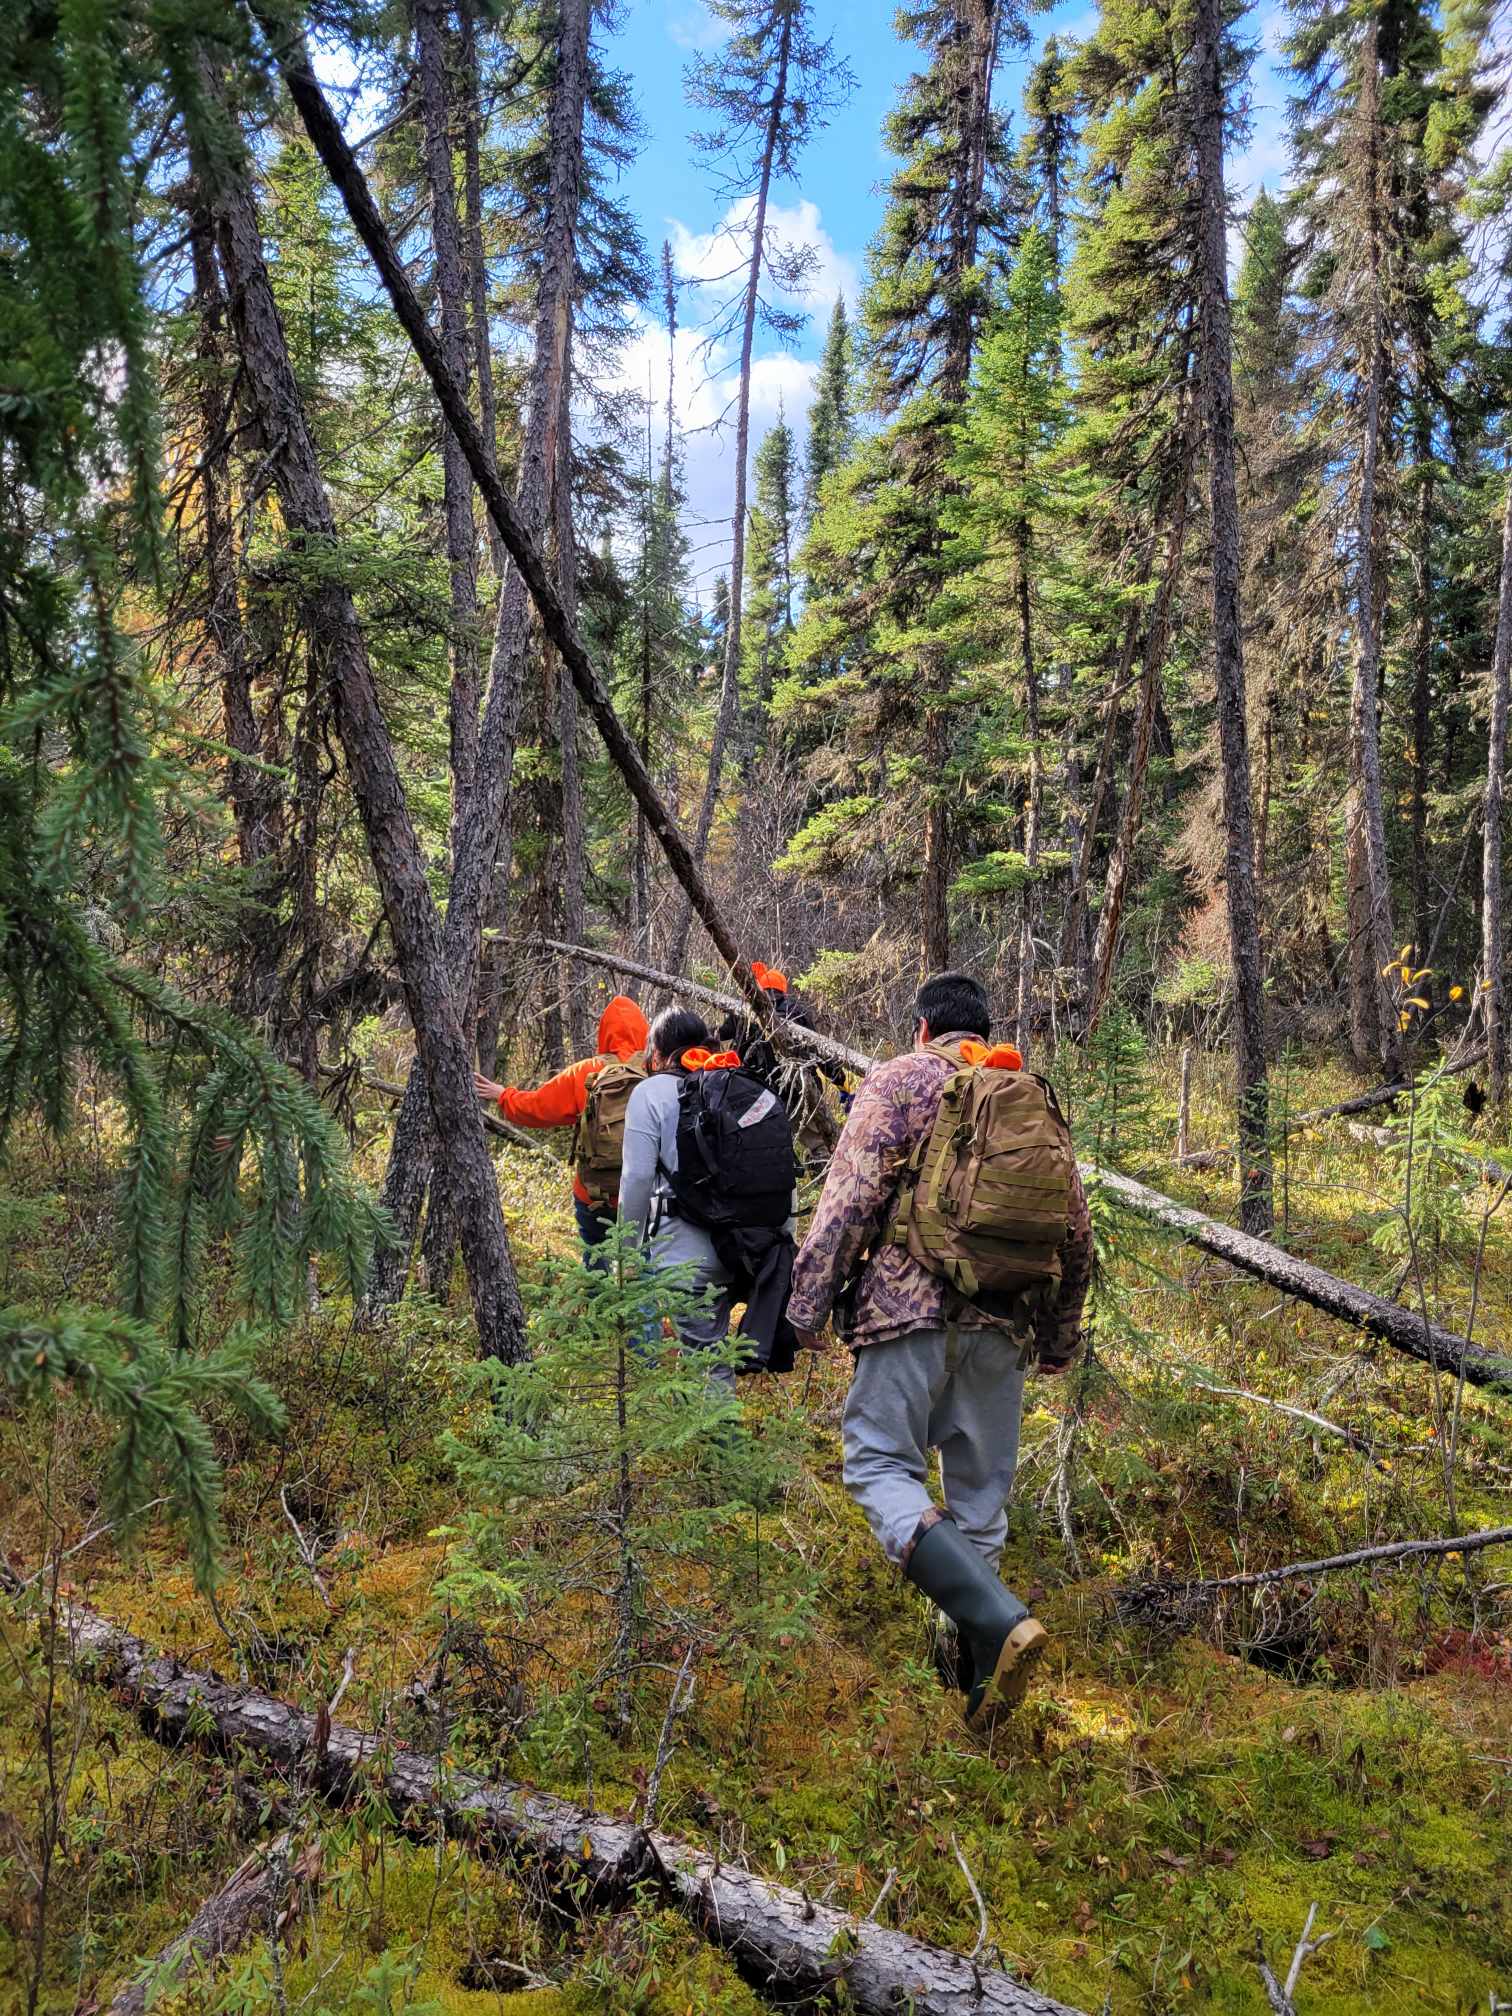 A group of hunters walking through a wooded area.